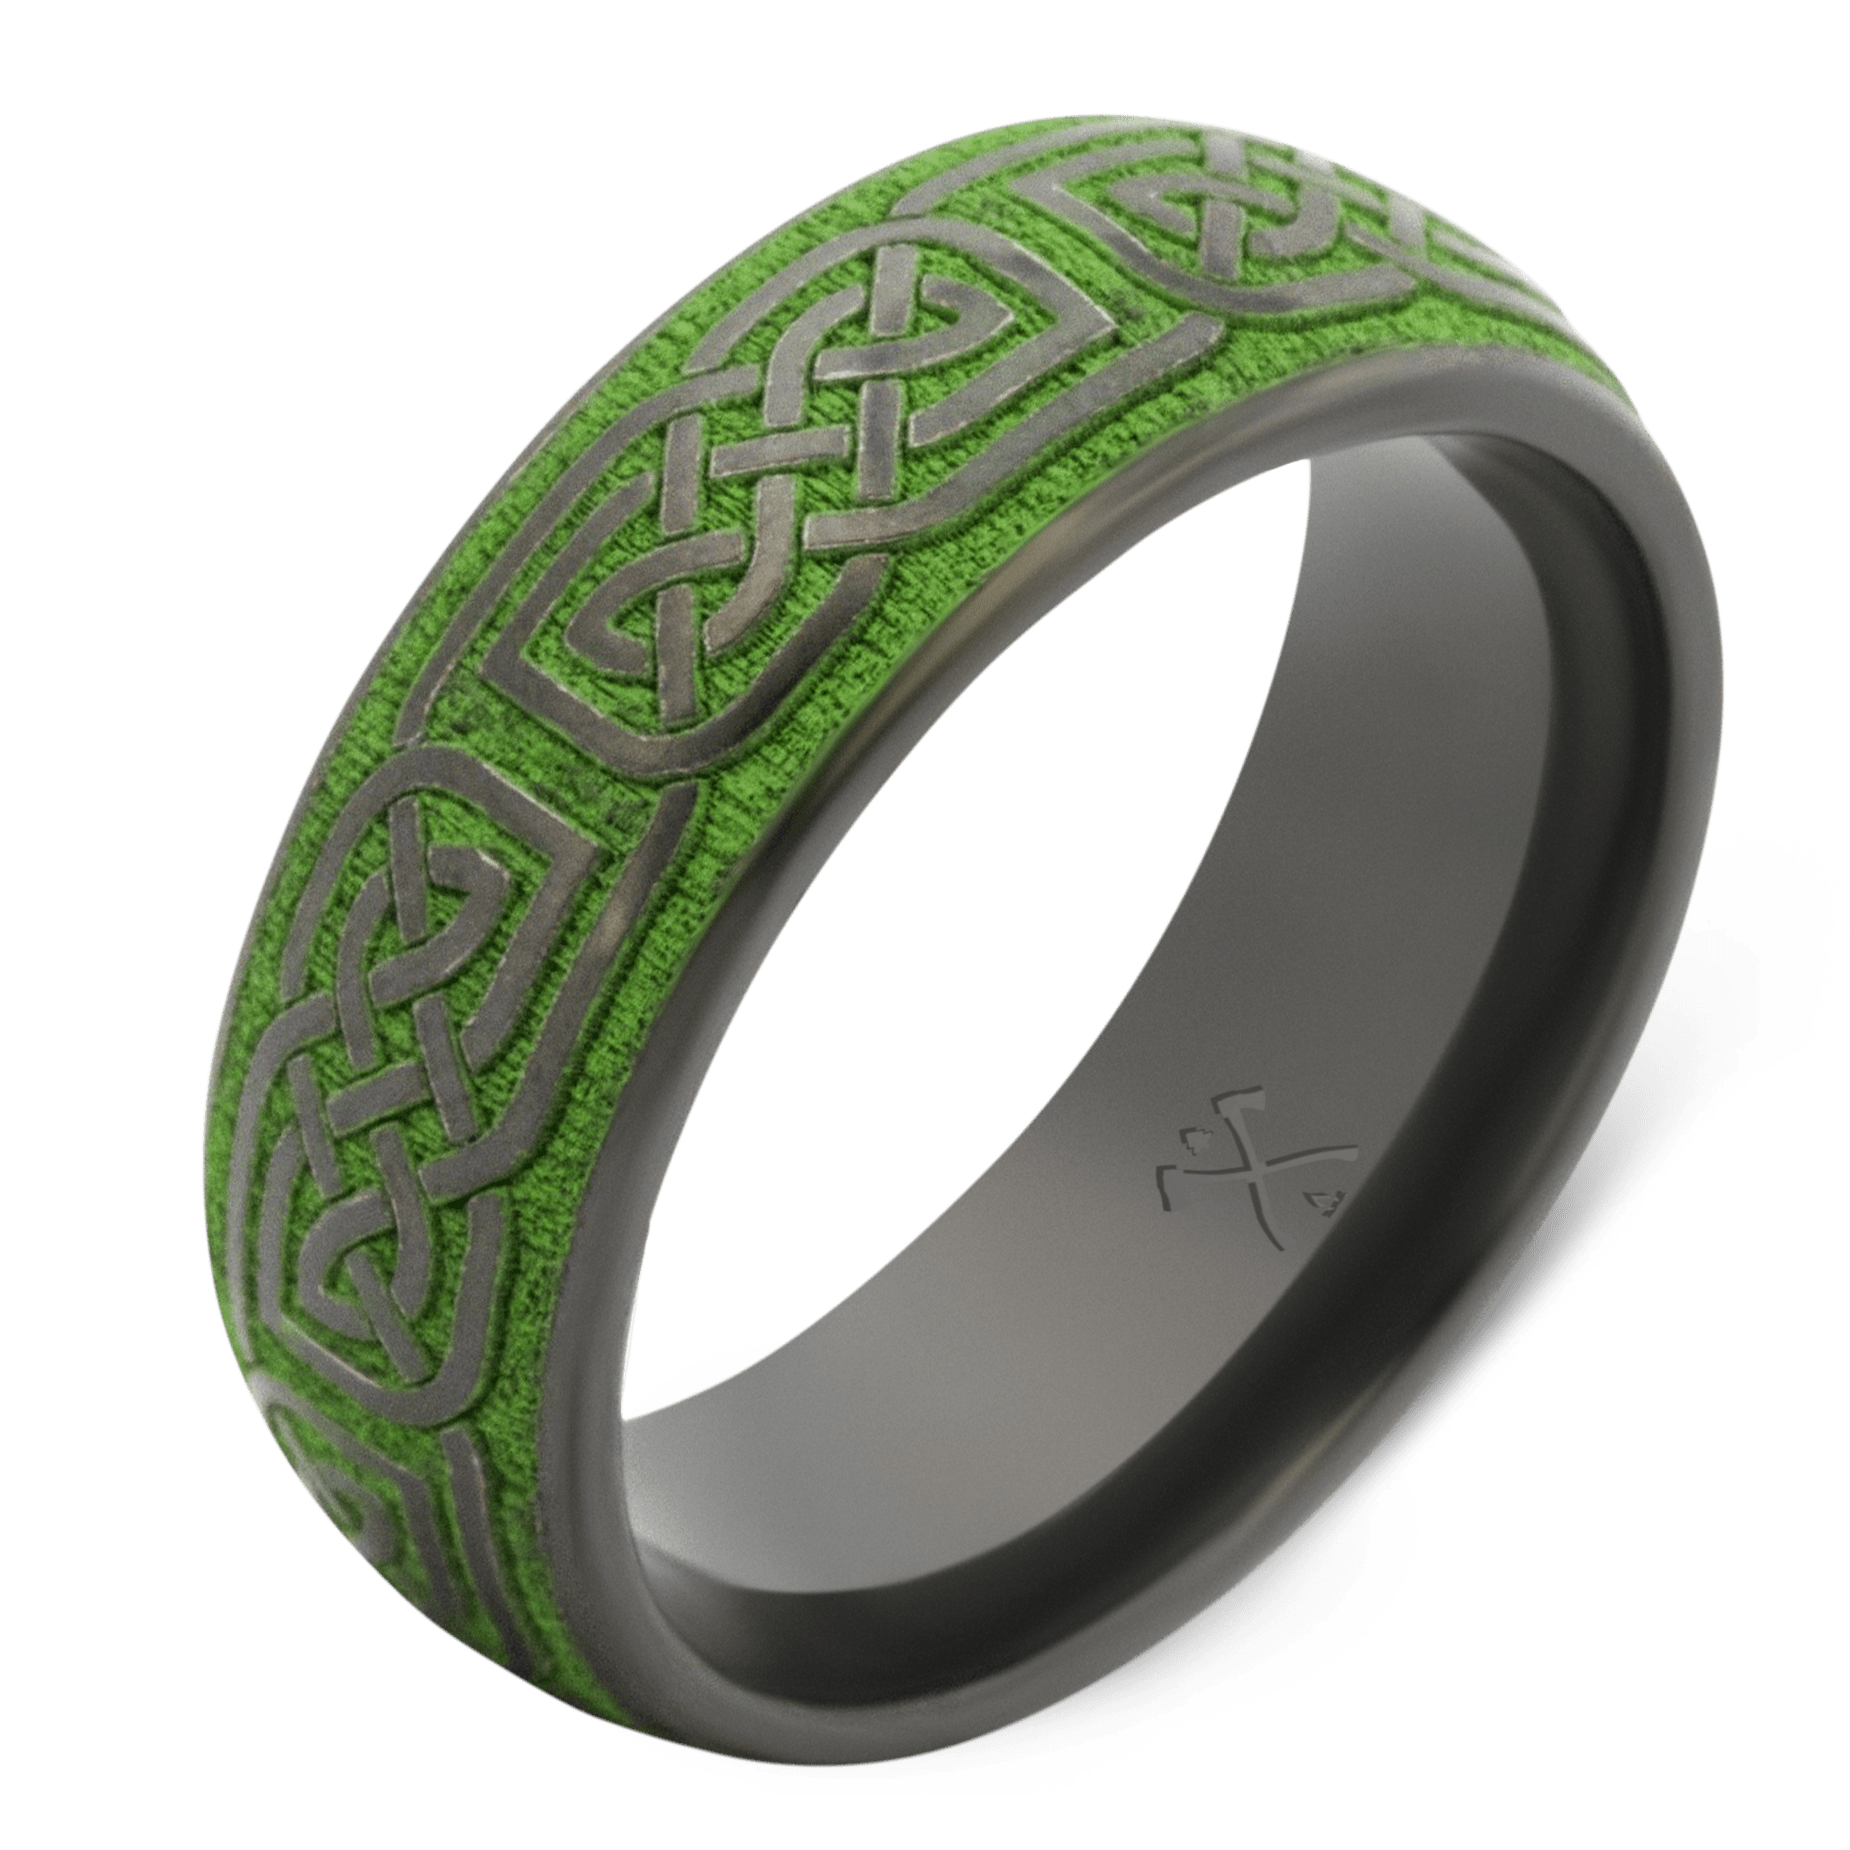 The Wallace - Men's Wedding Rings - Manly Bands